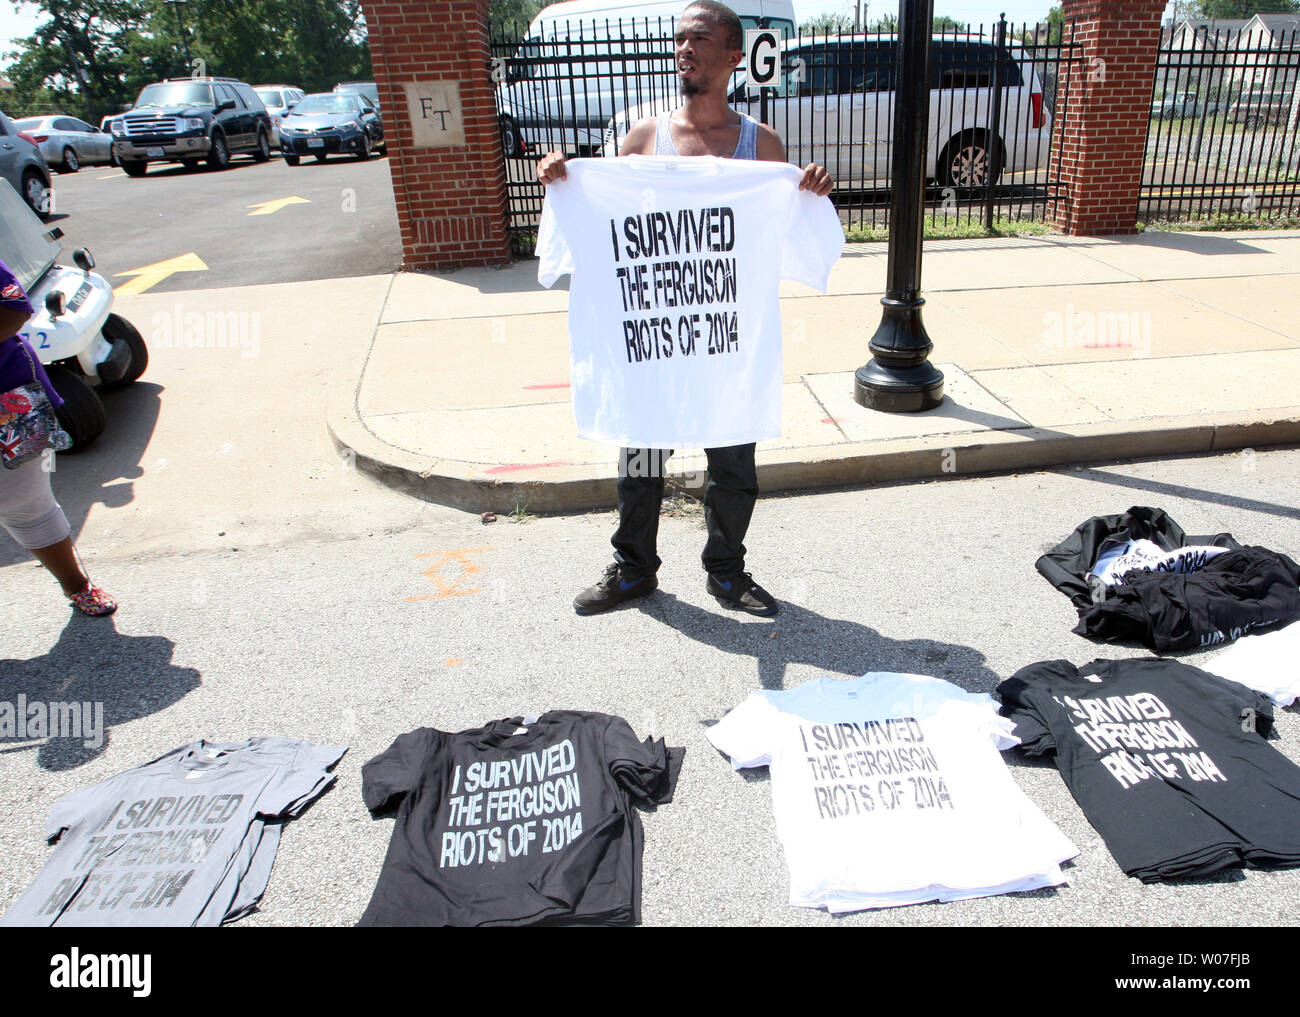 A salesman sells 'I survived the Ferguson riots of 2014'  tee shirts outside of the Friendly Temple Missionary Baptist Church during the funeral of Michael Brown Jr. in St. Louis on August 25, 2014. Brown gained attention after was shot by a white Ferguson, Missouri police officer on August 9 and was unarmed. The shooting led to several nights of looting, arrests and heavy police presence.   UPI/Bill Greenblatt Stock Photo